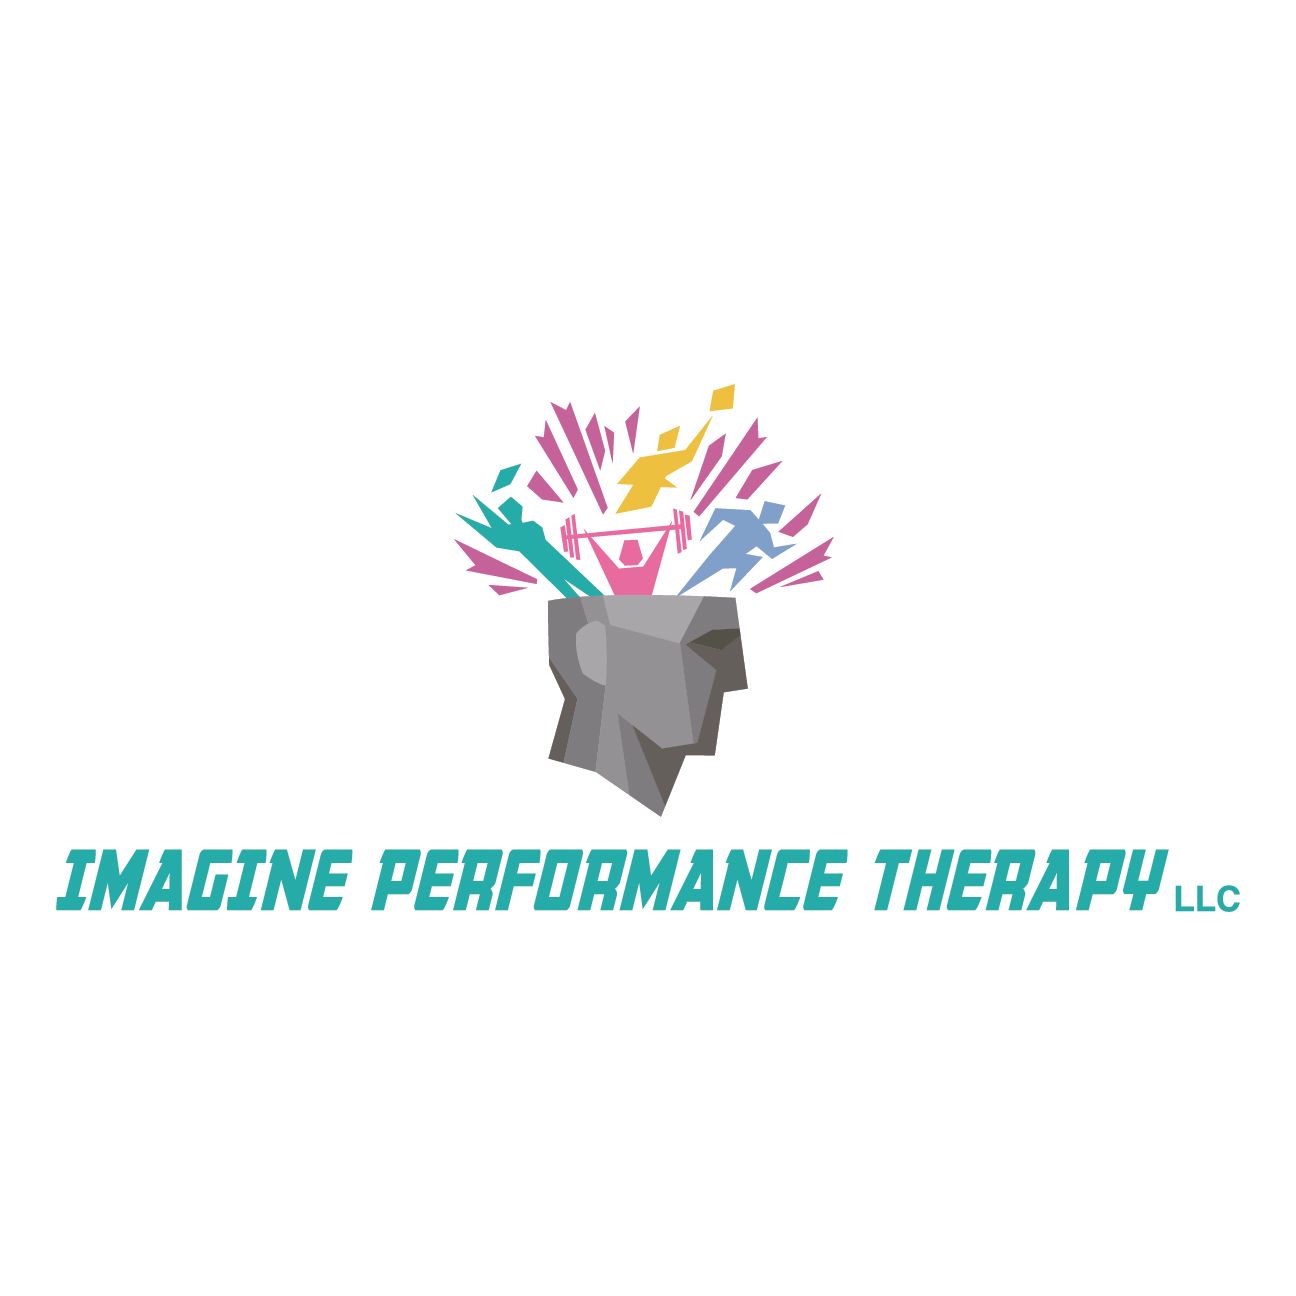 Life Without Limits - Imagine Performance Therapy